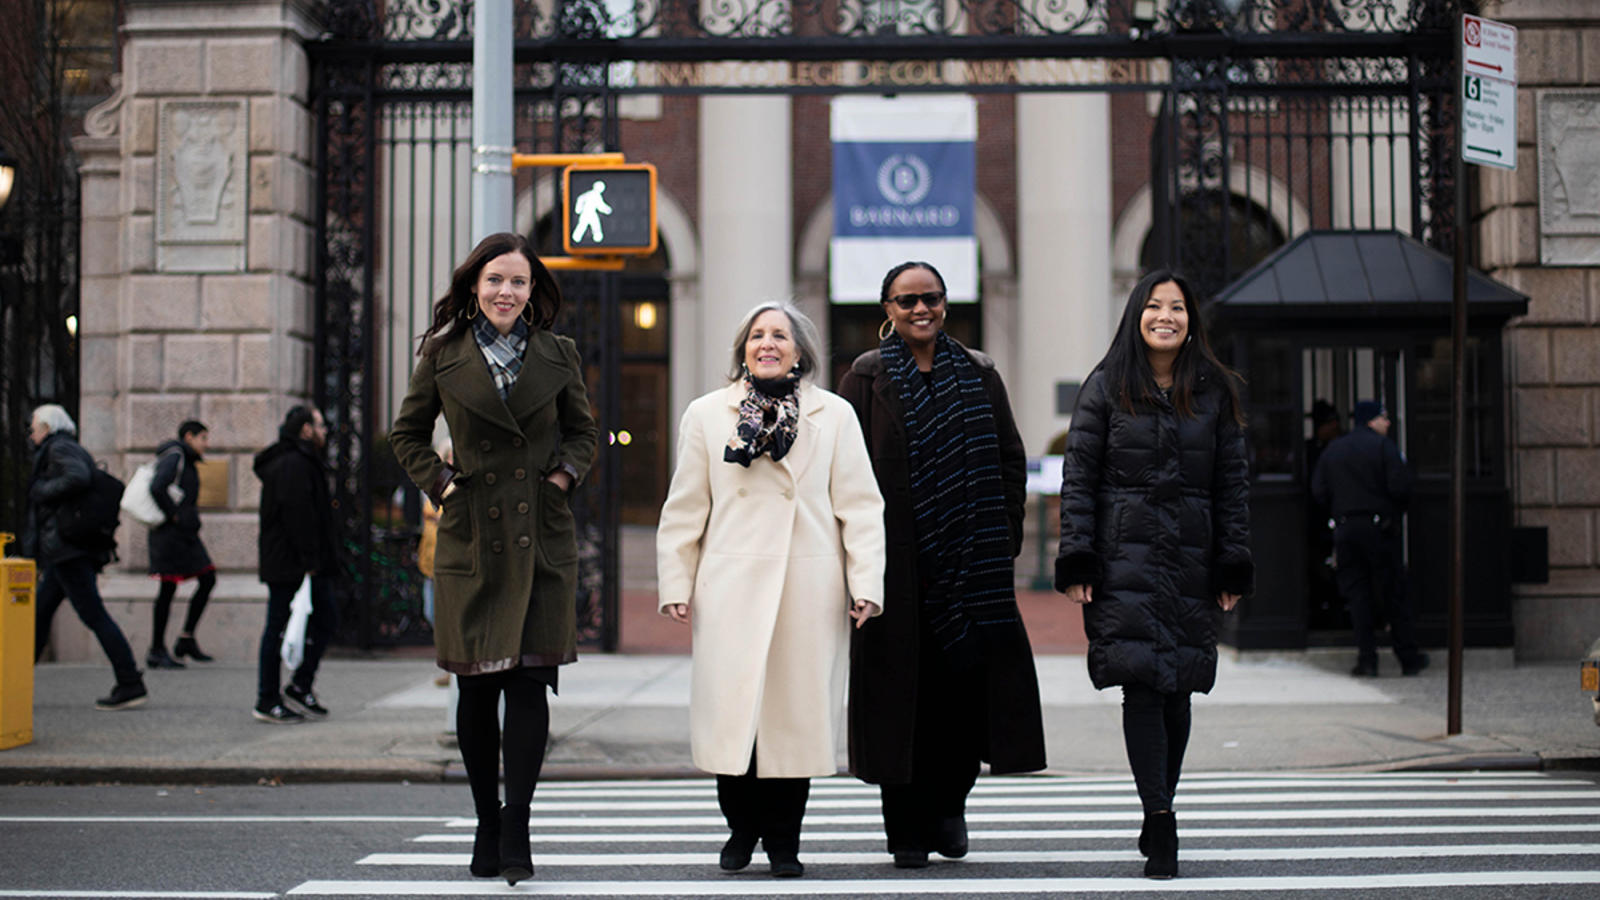 Alumnae on broadway in front of gates